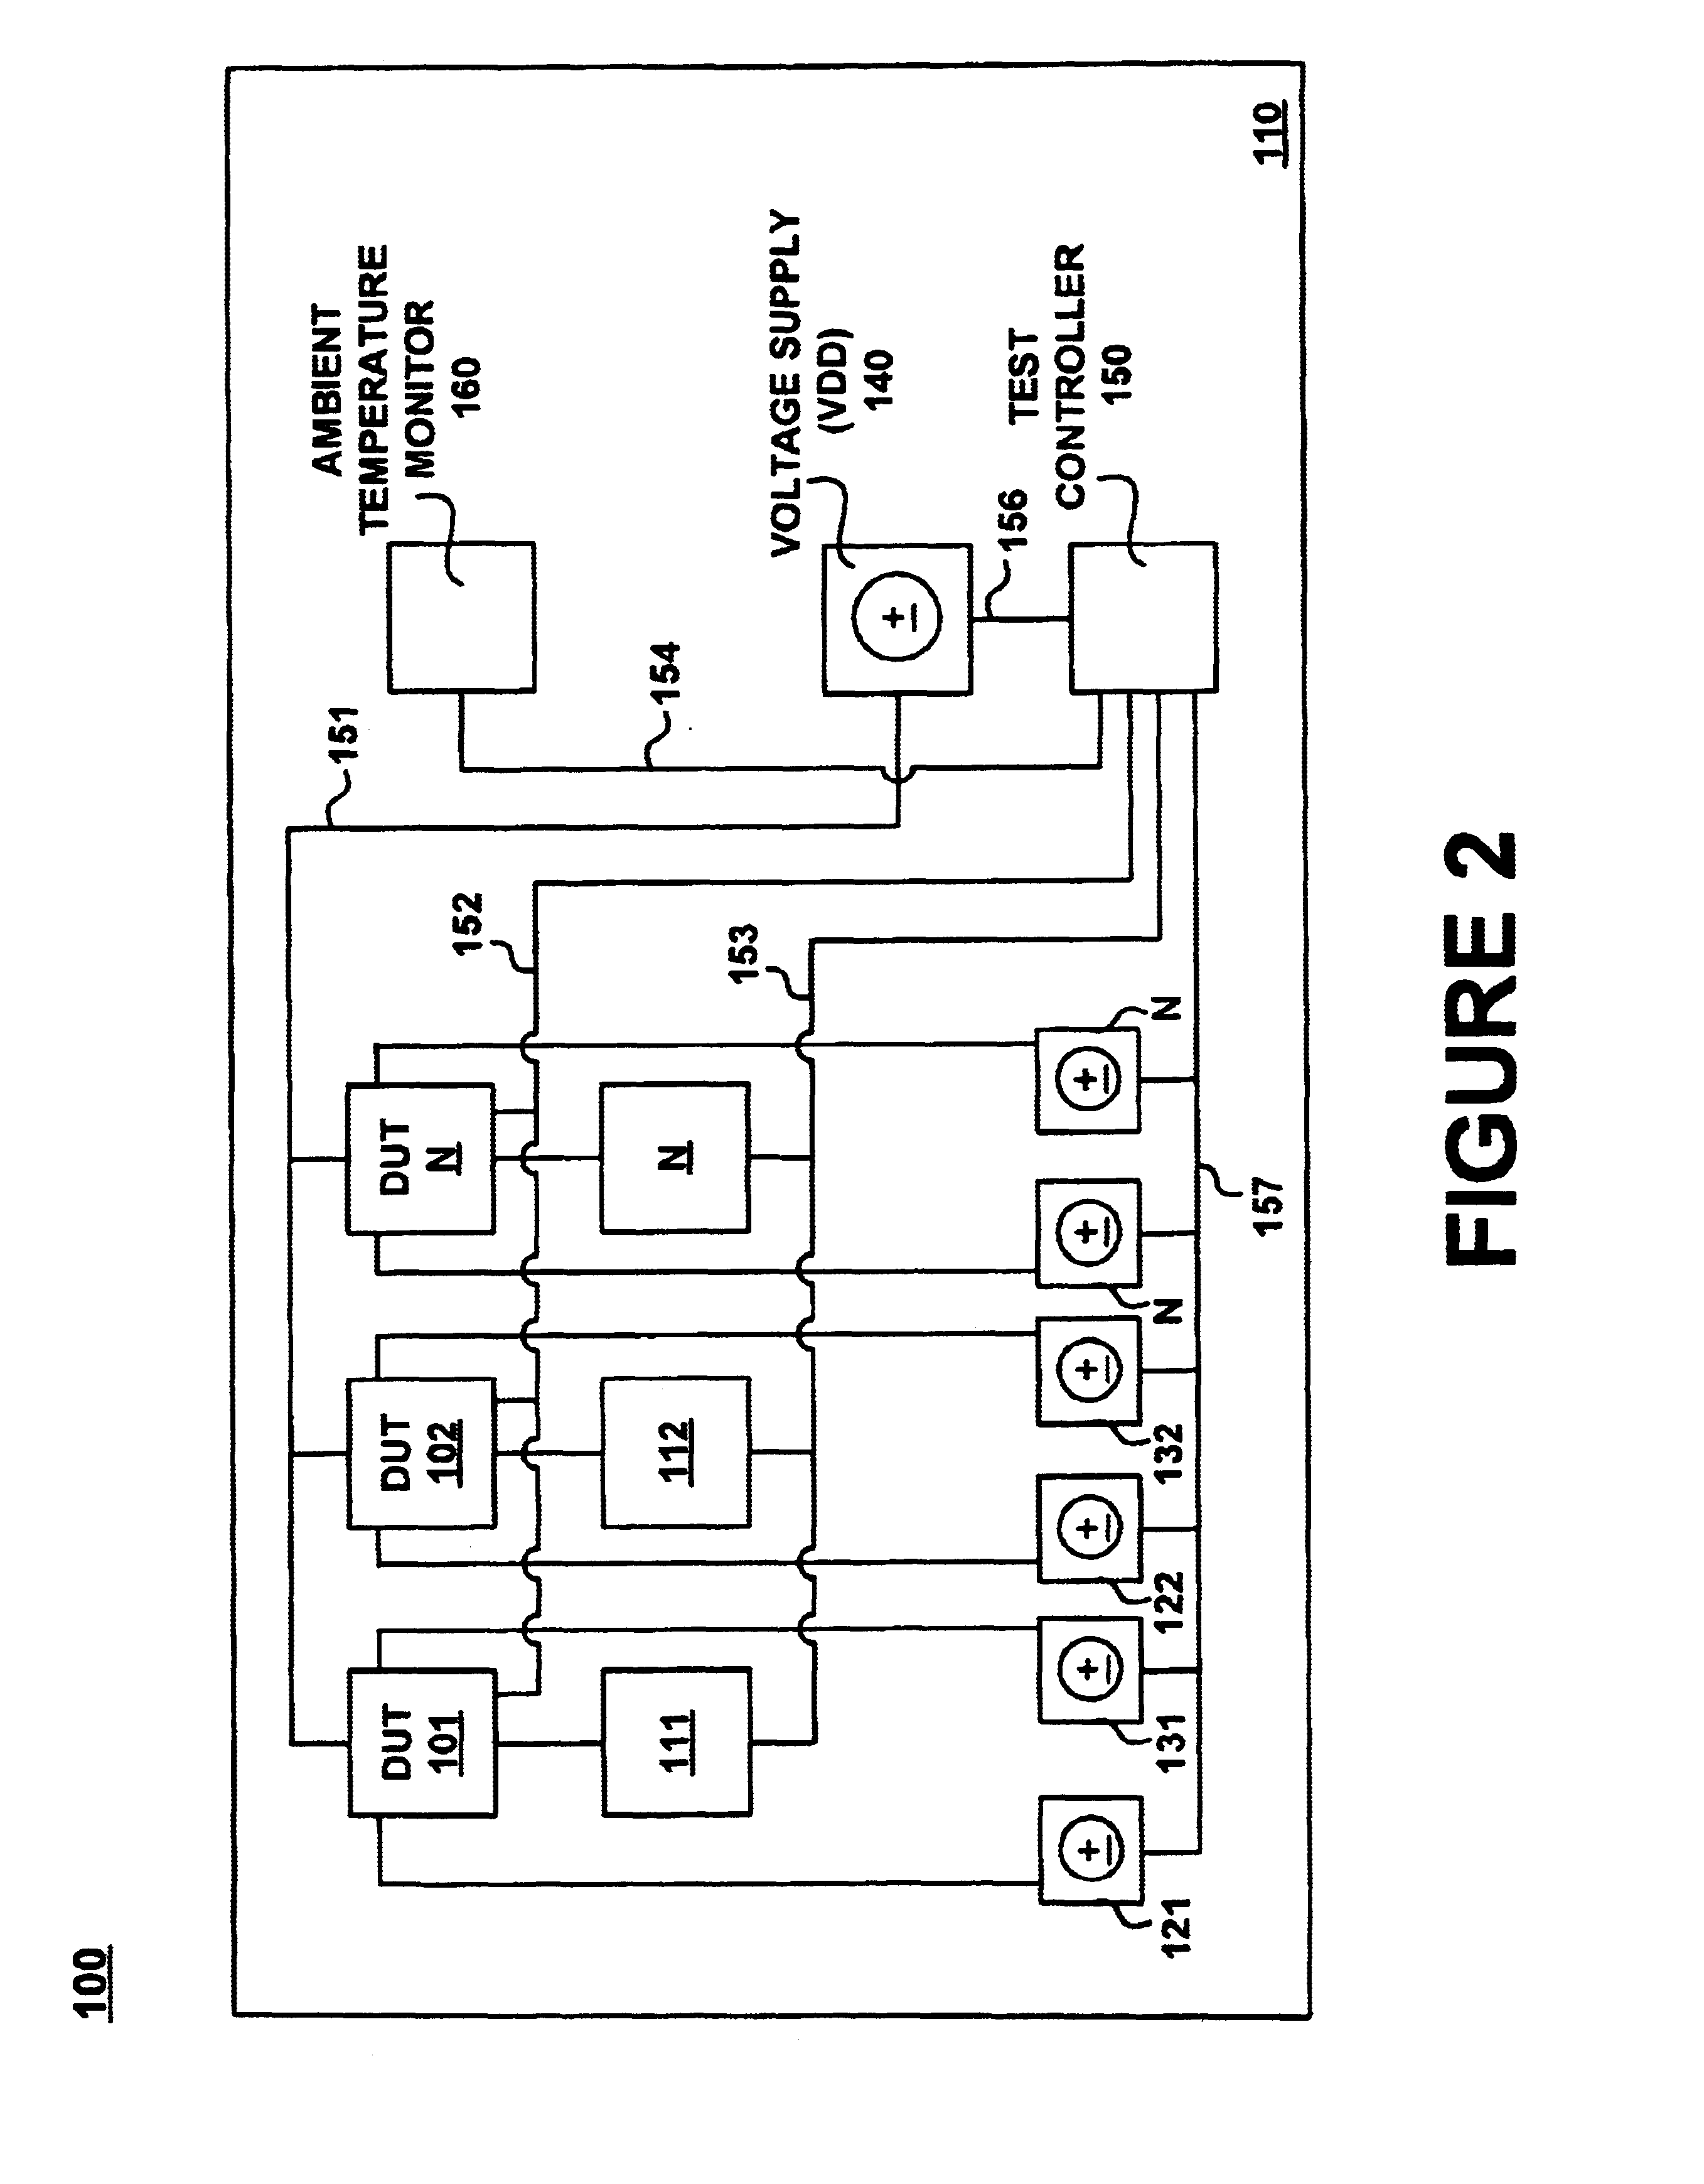 System and method for controlling temperature during burn-in